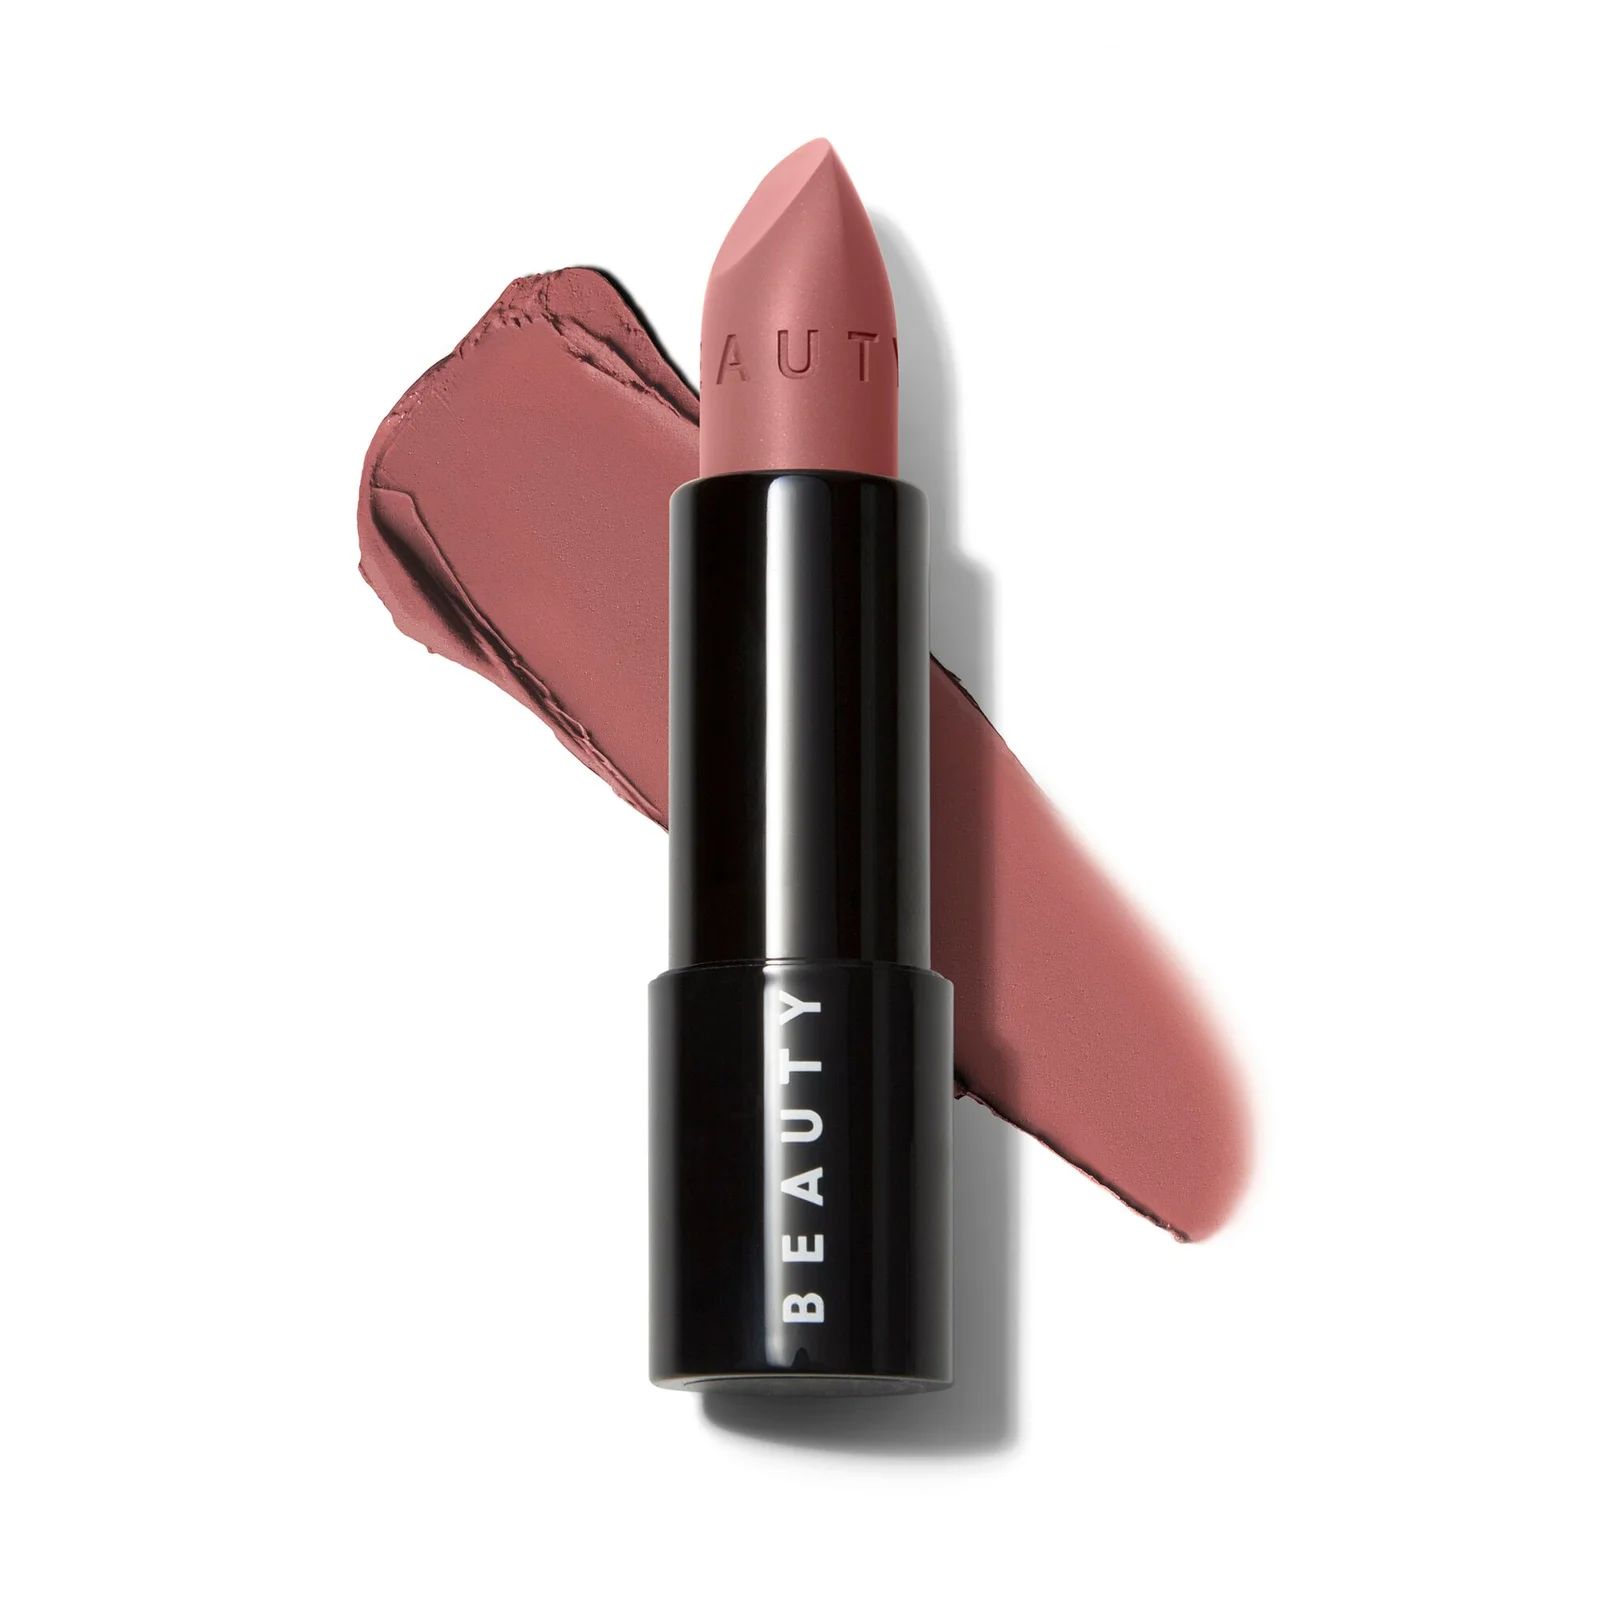 Be forewarned - this lipstick may drive you matte. | Beauty Pie (UK)